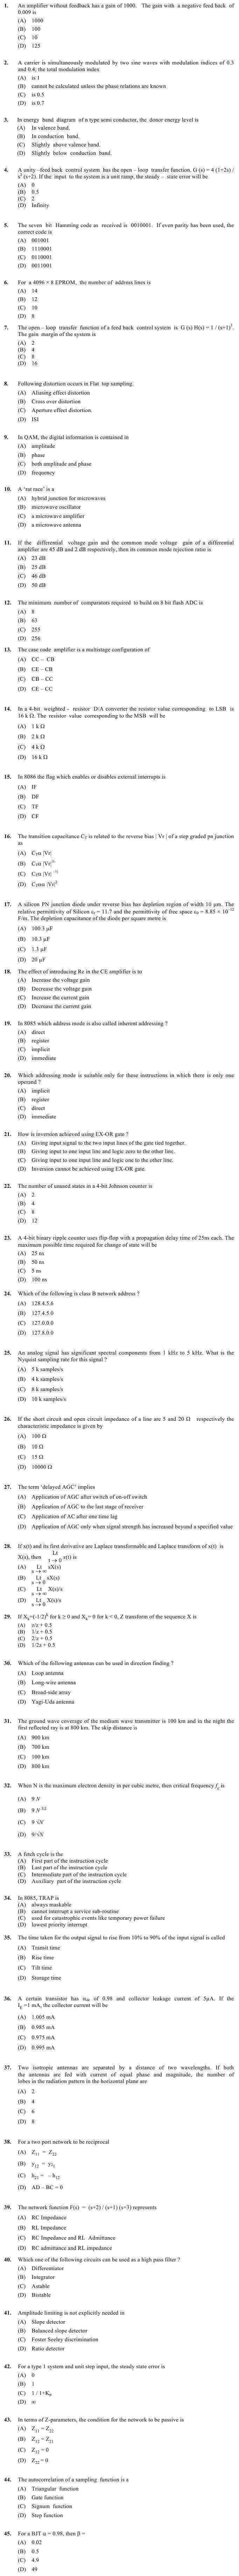 OJEE 2013 Question Paper for PGAT Electronics